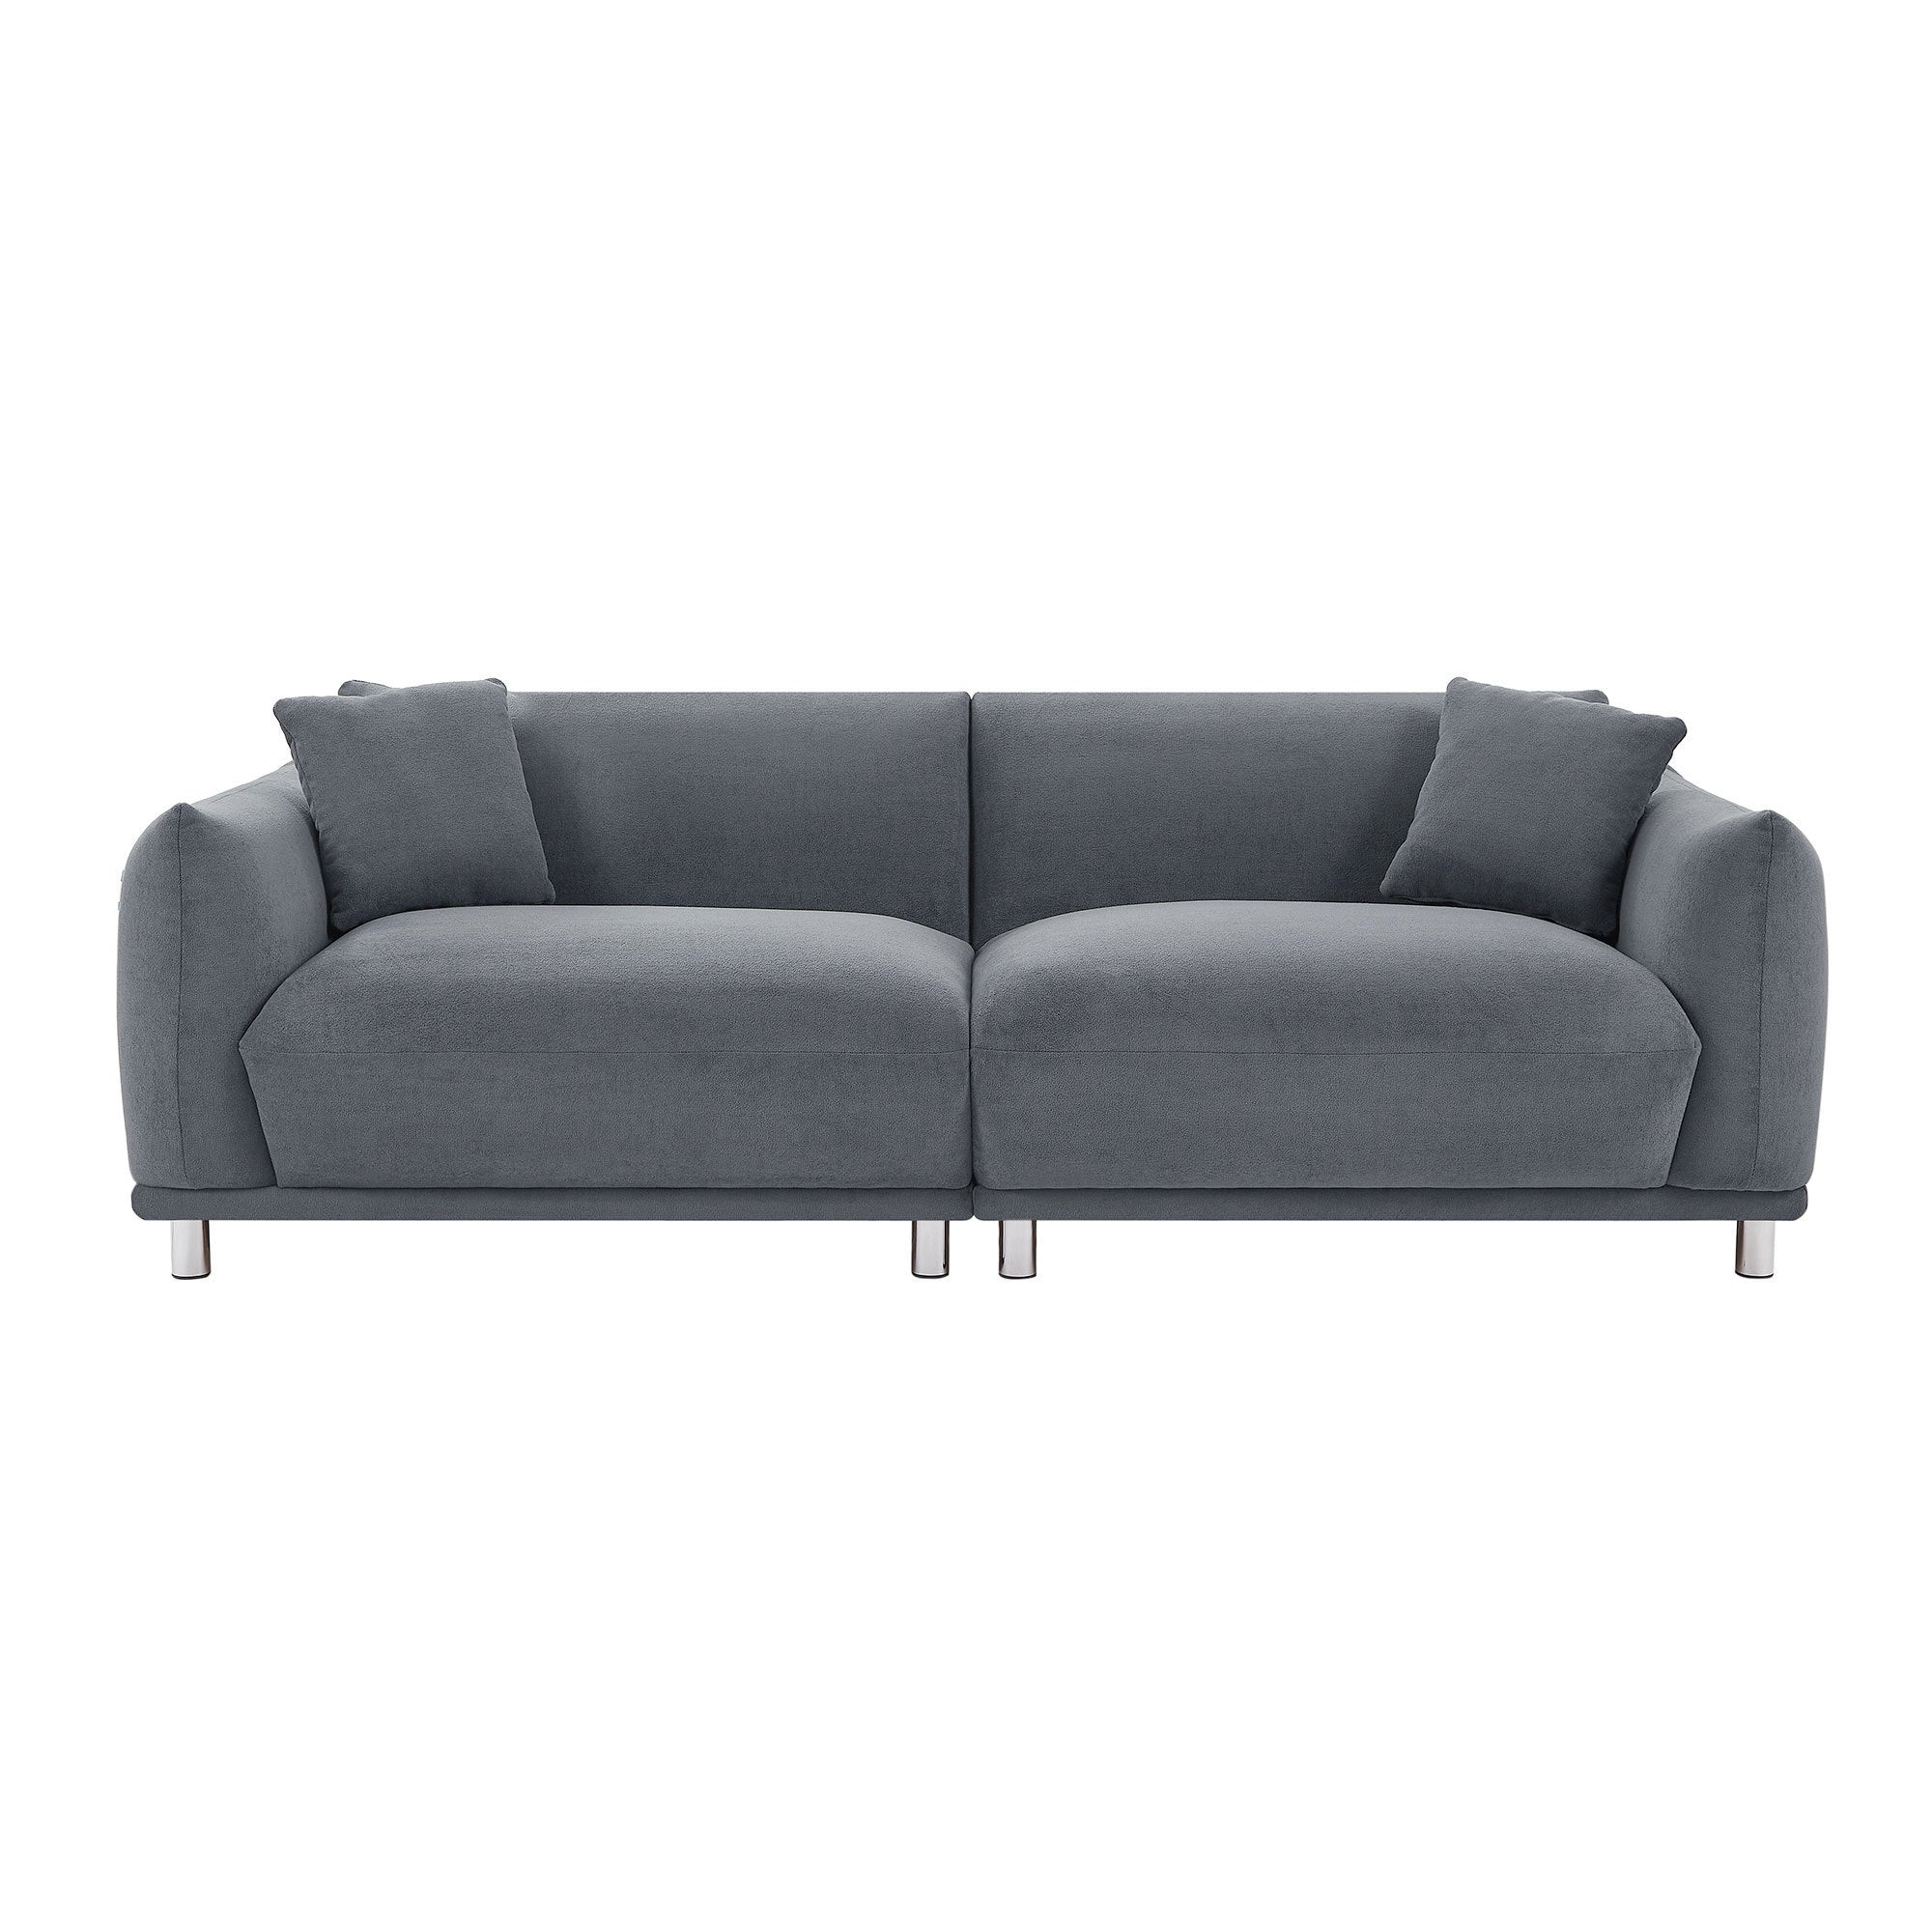 🆓🚛 88.58" Sofa, Comfy Sofa Couch With Extra Deep Seats, Modern Sofa Bread-Like Sofa With 2 Pillows & Metal Feet With Anti-Skid Pads, Dark Gray